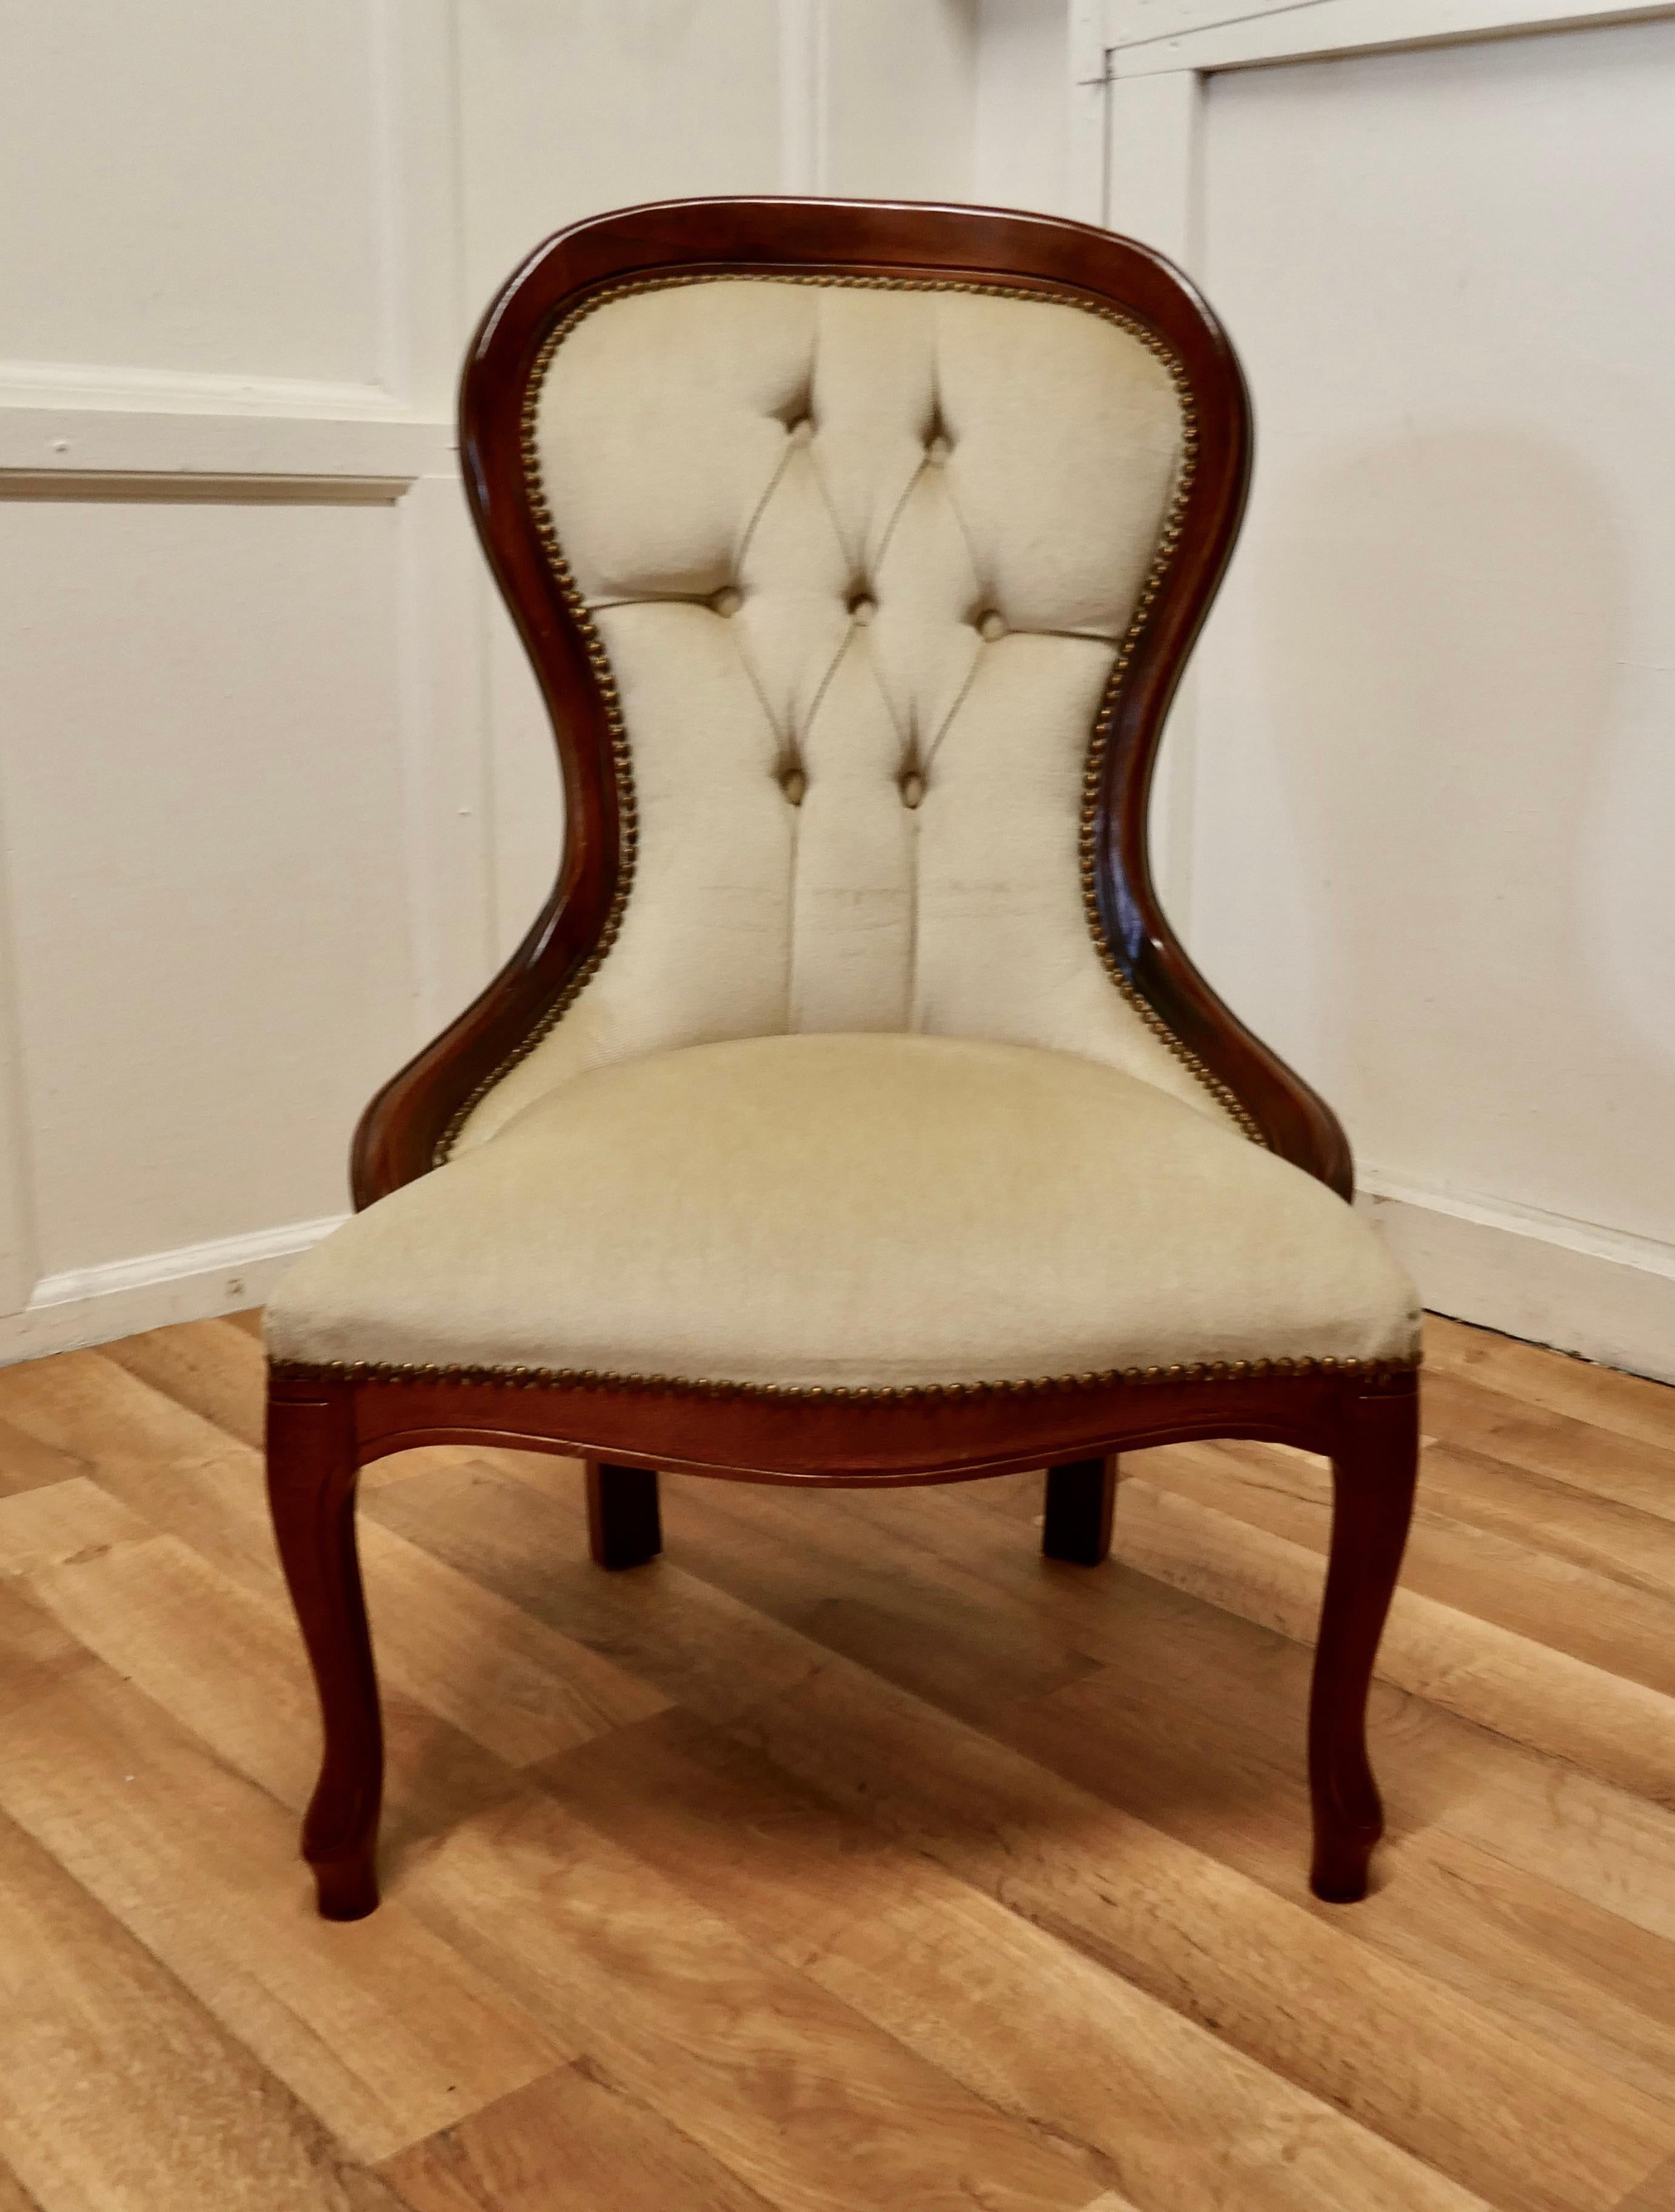 Good Victorian Style Spoon Back Easy Chair In Good Condition For Sale In Chillerton, Isle of Wight